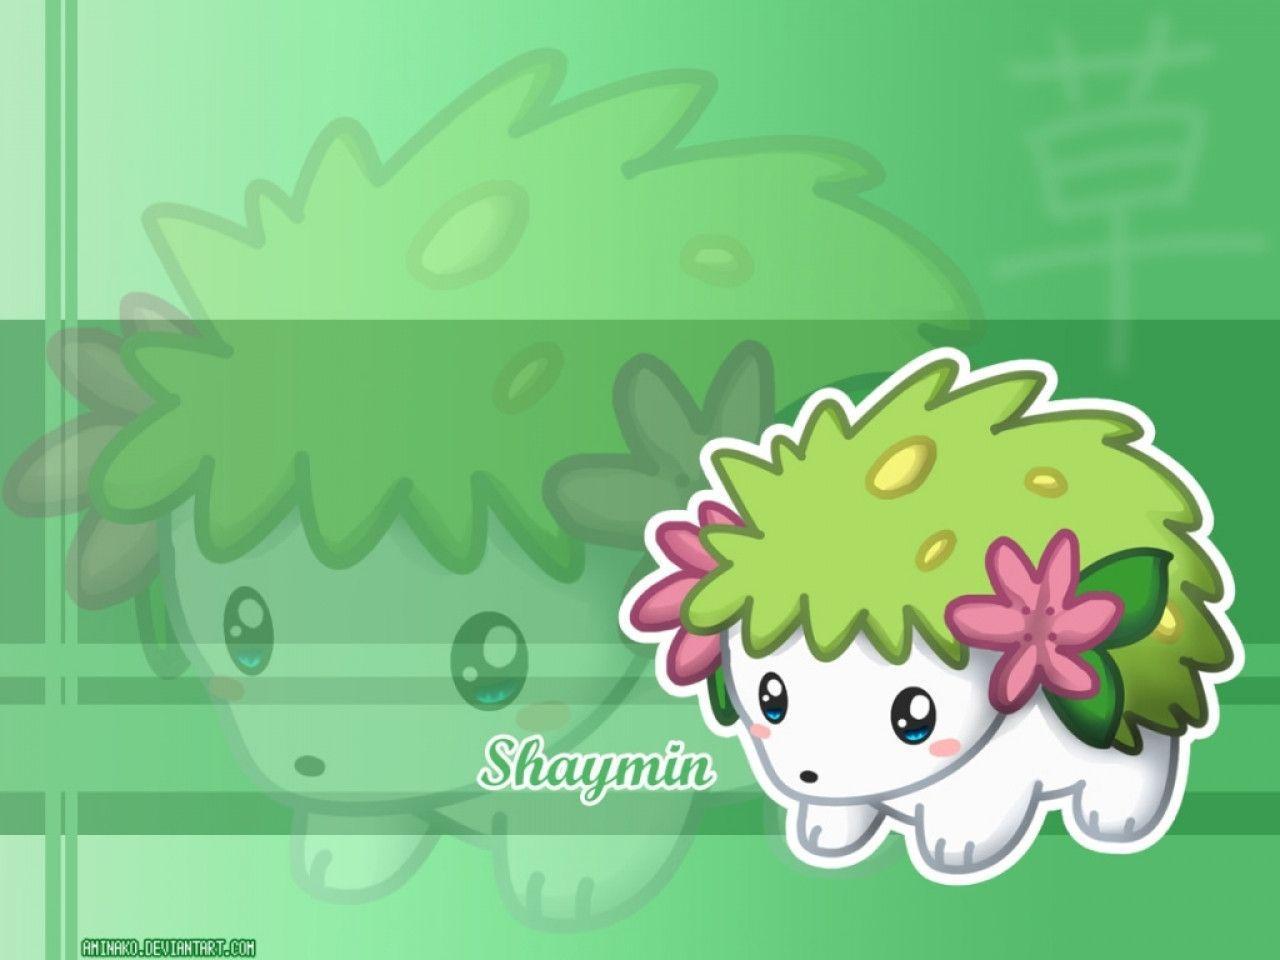 Cute green wallpaper with the pokemon character shaymin